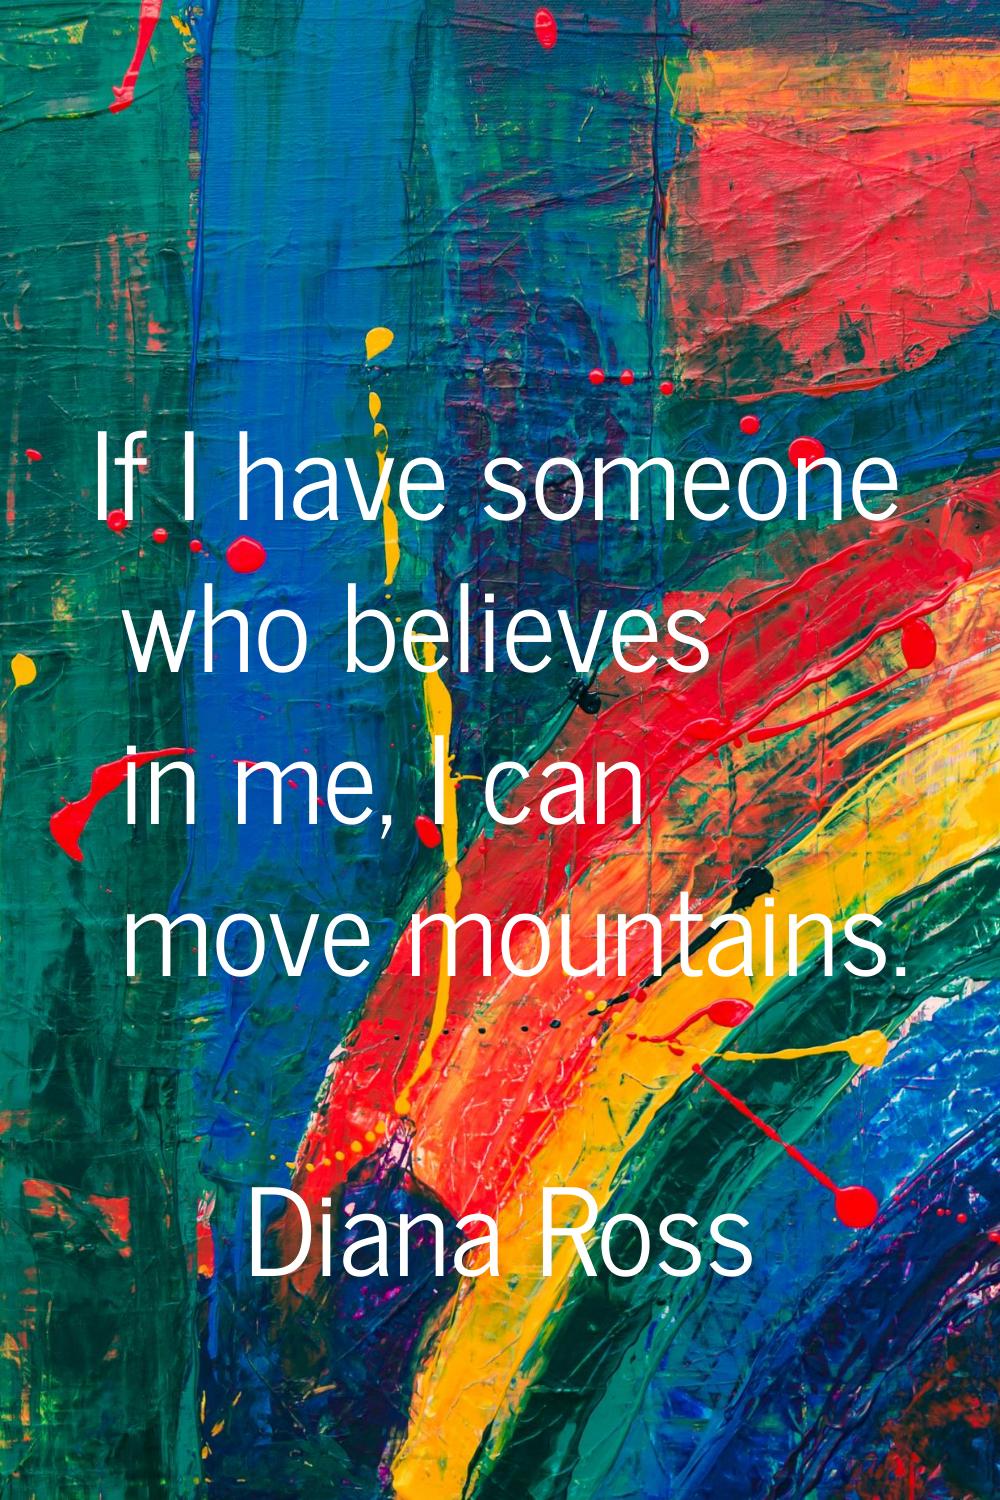 If I have someone who believes in me, I can move mountains.